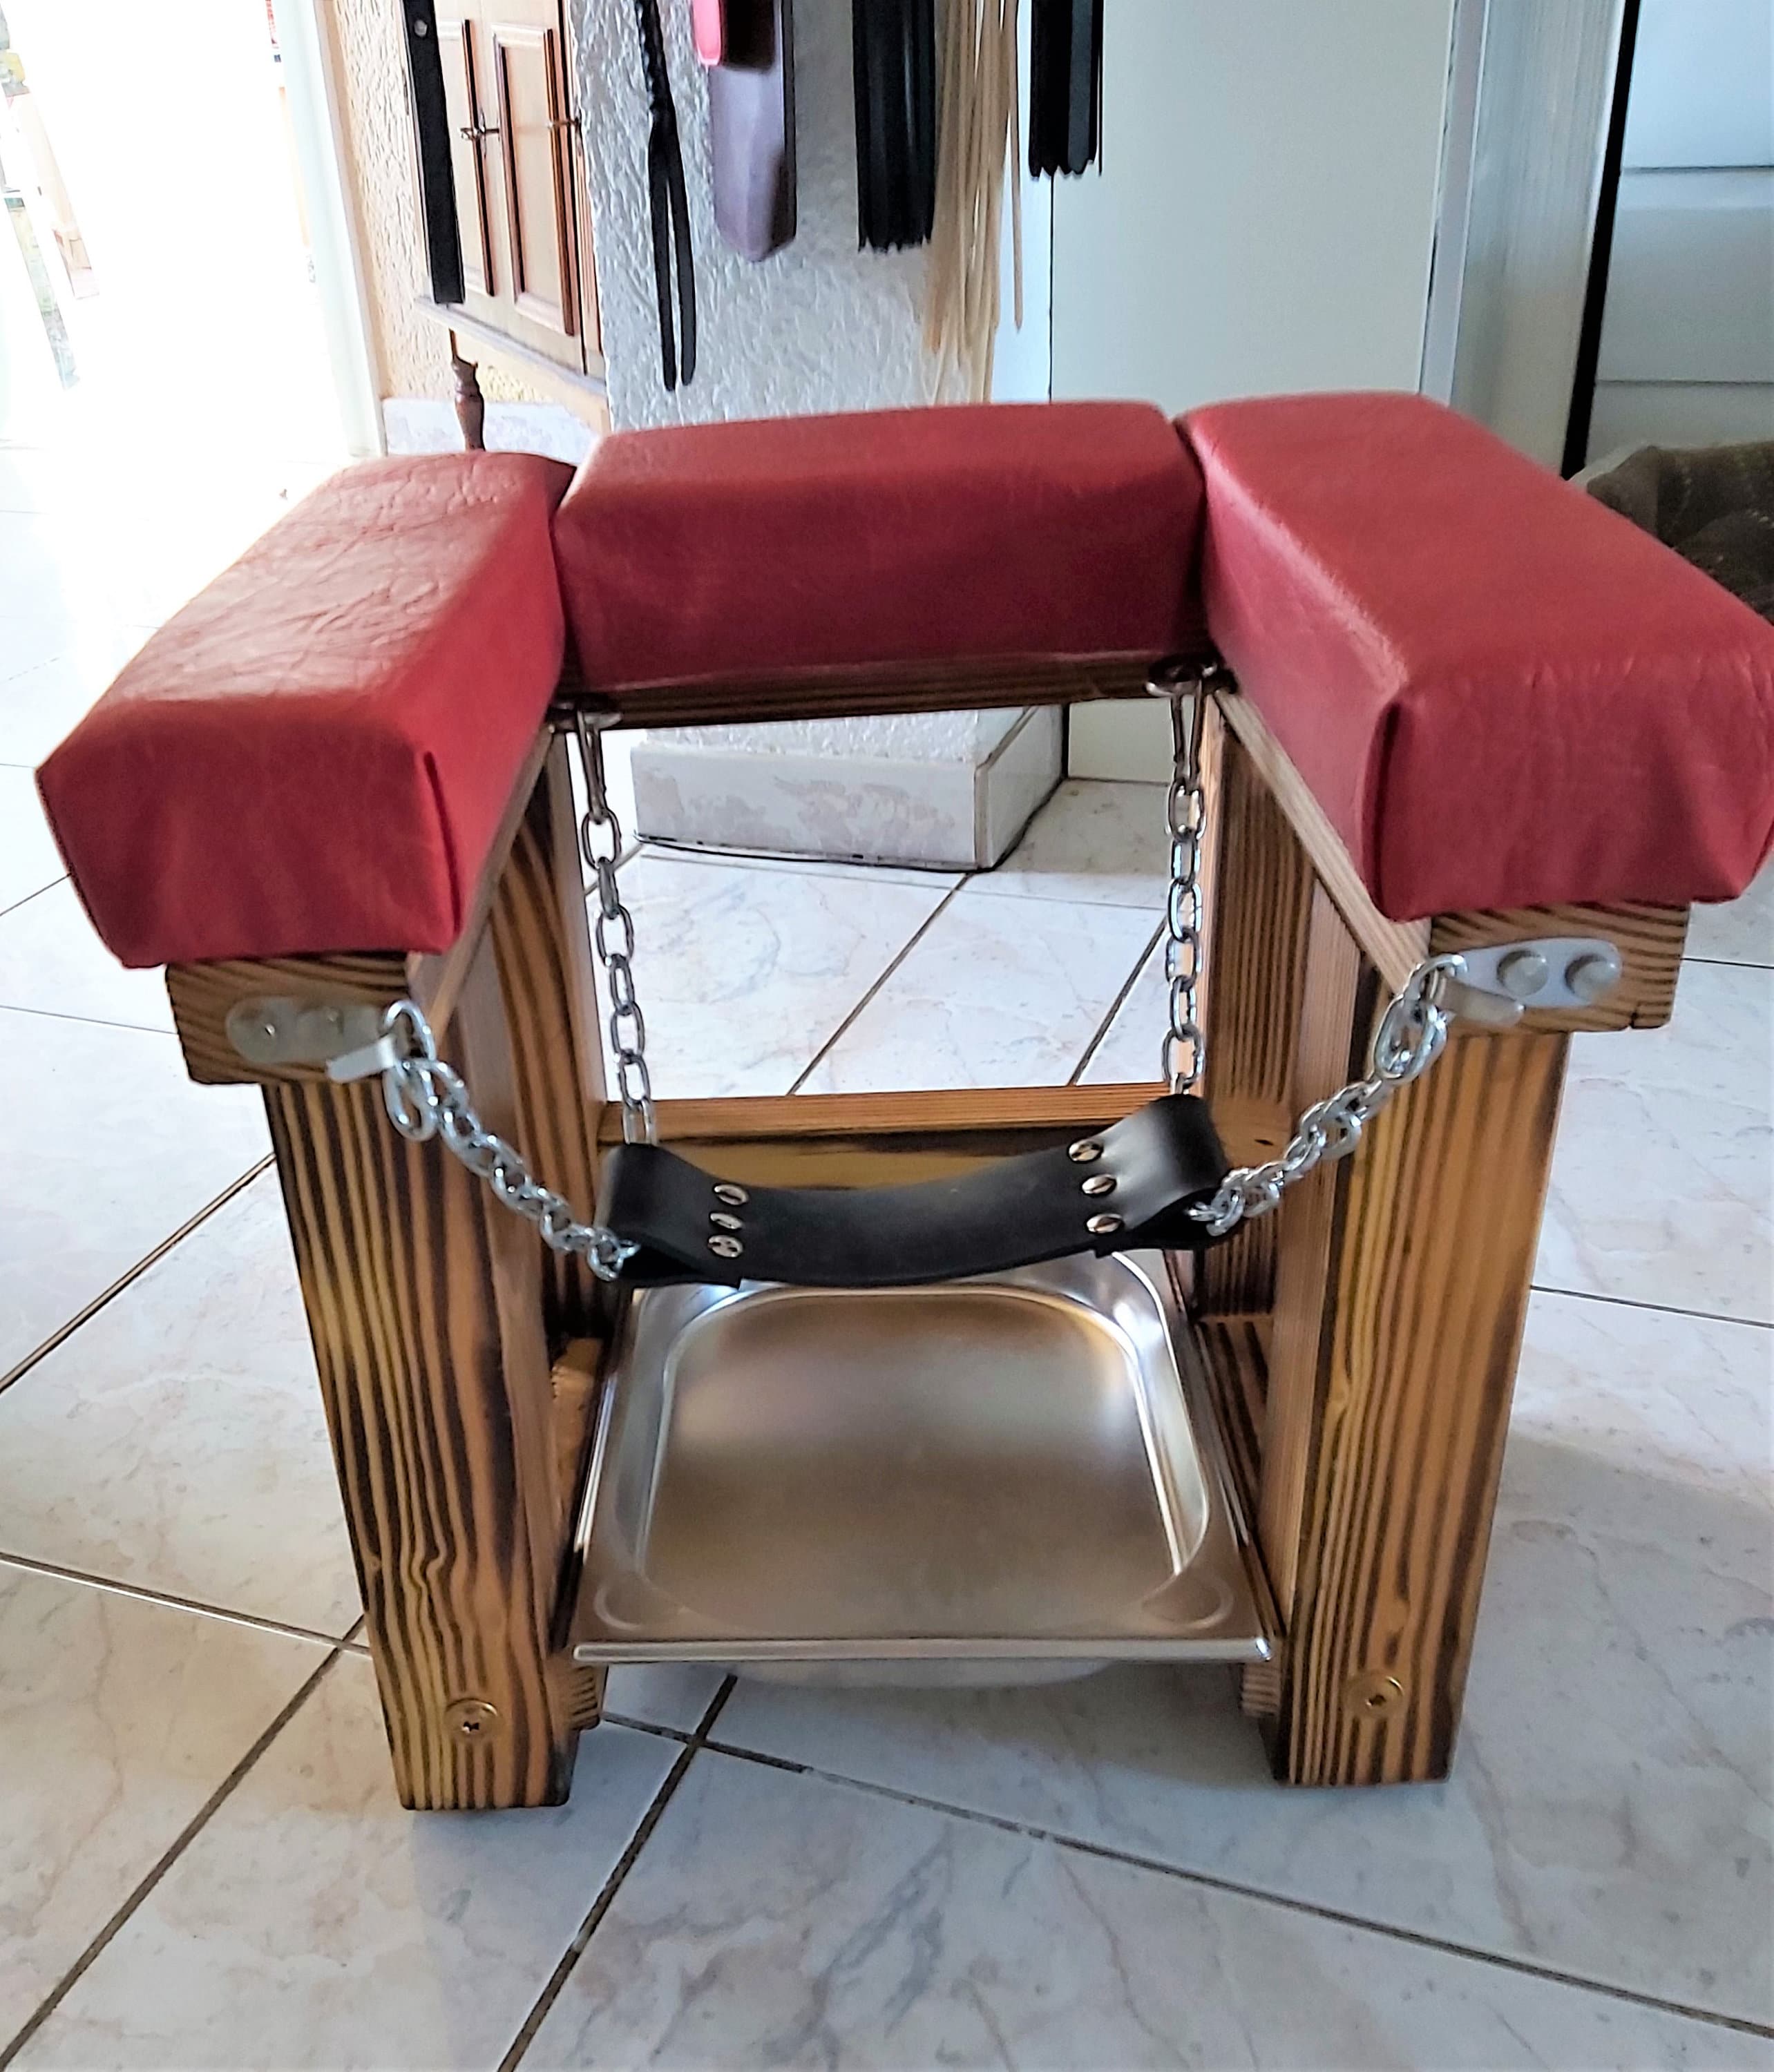 august sadia share how to make a queening chair photos